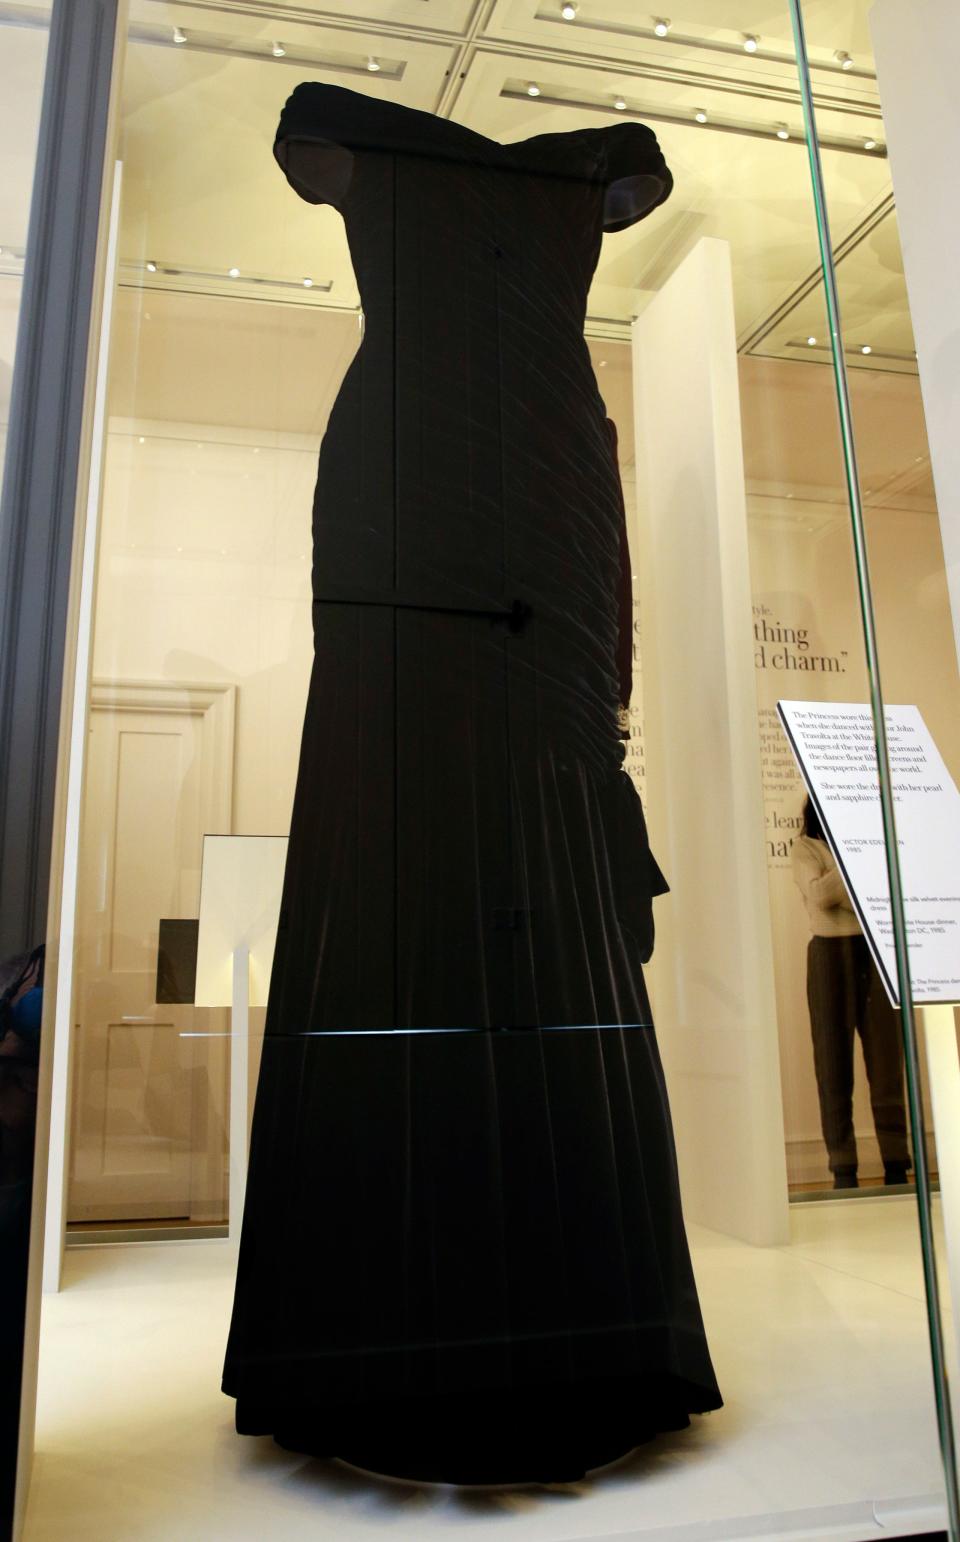 A Victor Edelstein dress in midnight blue silk velvet, worn by Diana Princess of Wales at a State Dinner at the White House in 1985, on display during a media preview of an exhibition of 25 dresses and outfits worn by Diana, Princess of Wales entitled "Diana: Her Fashion Story" at Kensington Palace in London, Wednesday, Feb. 22, 2017. (AP Photo/Alastair Grant) ORG XMIT: XAG101